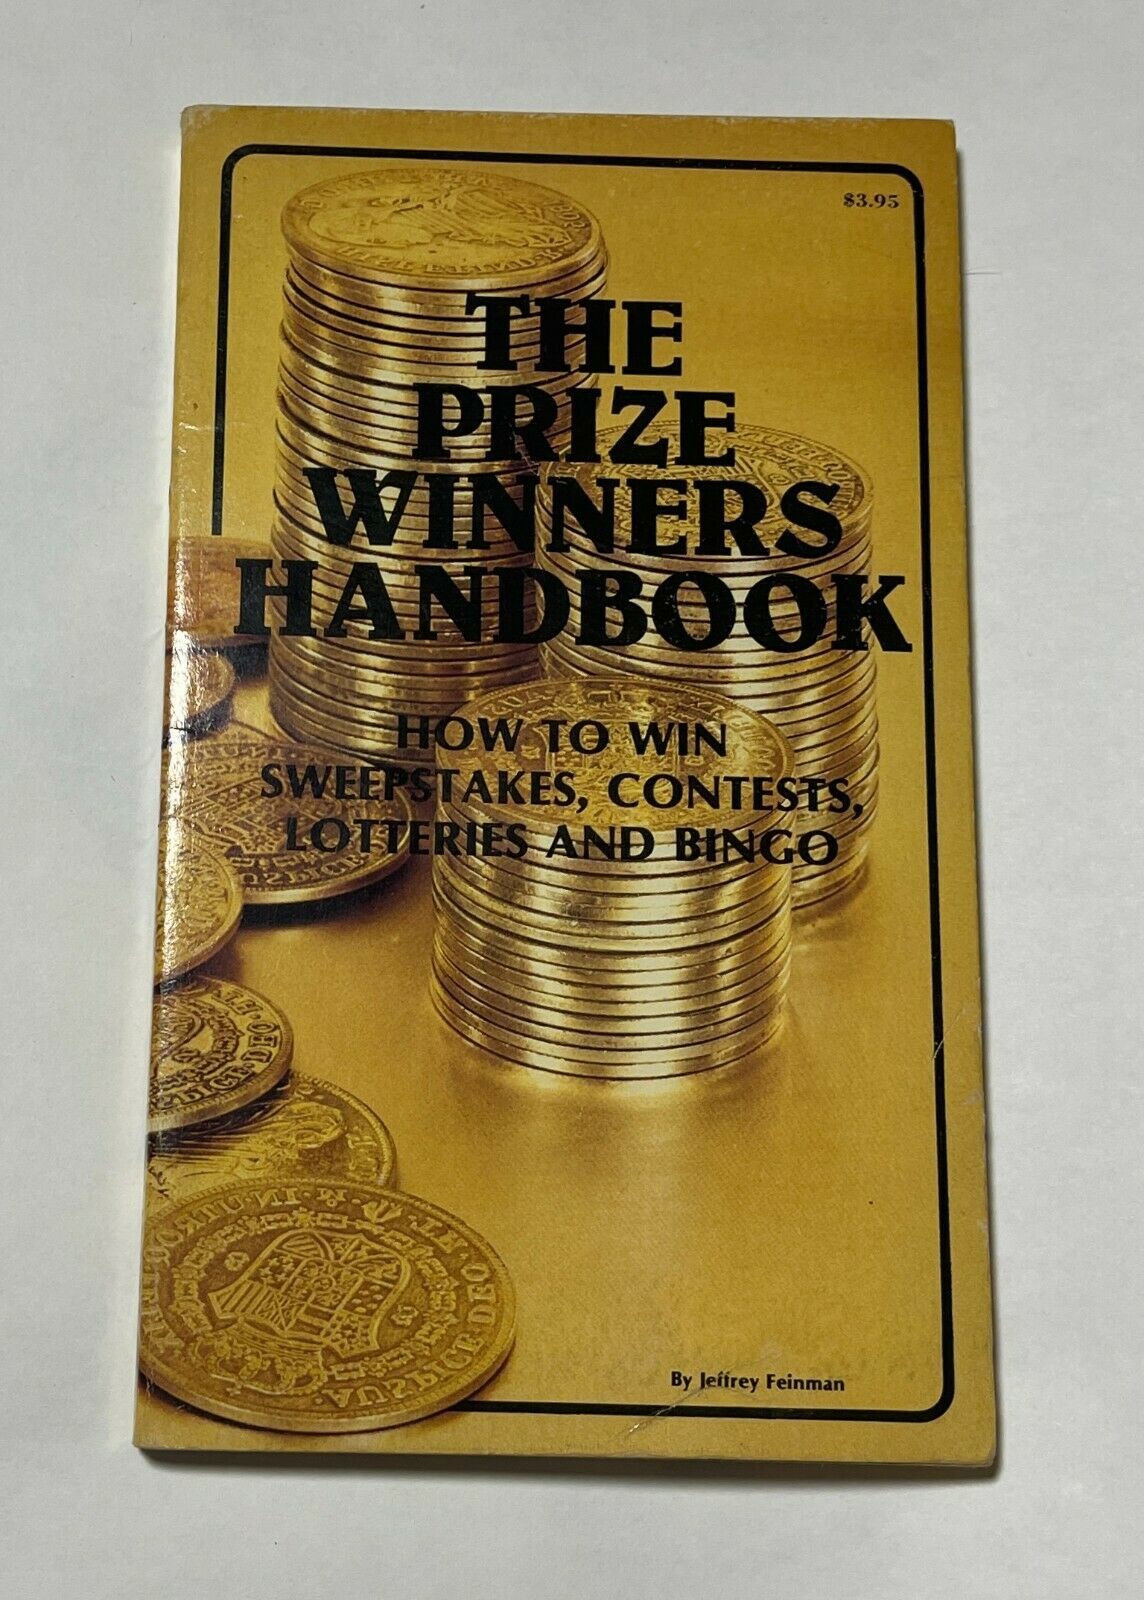 Primary image for The Prize Winners Handbook by Jeffrey Feinman (Paperback, 1980)